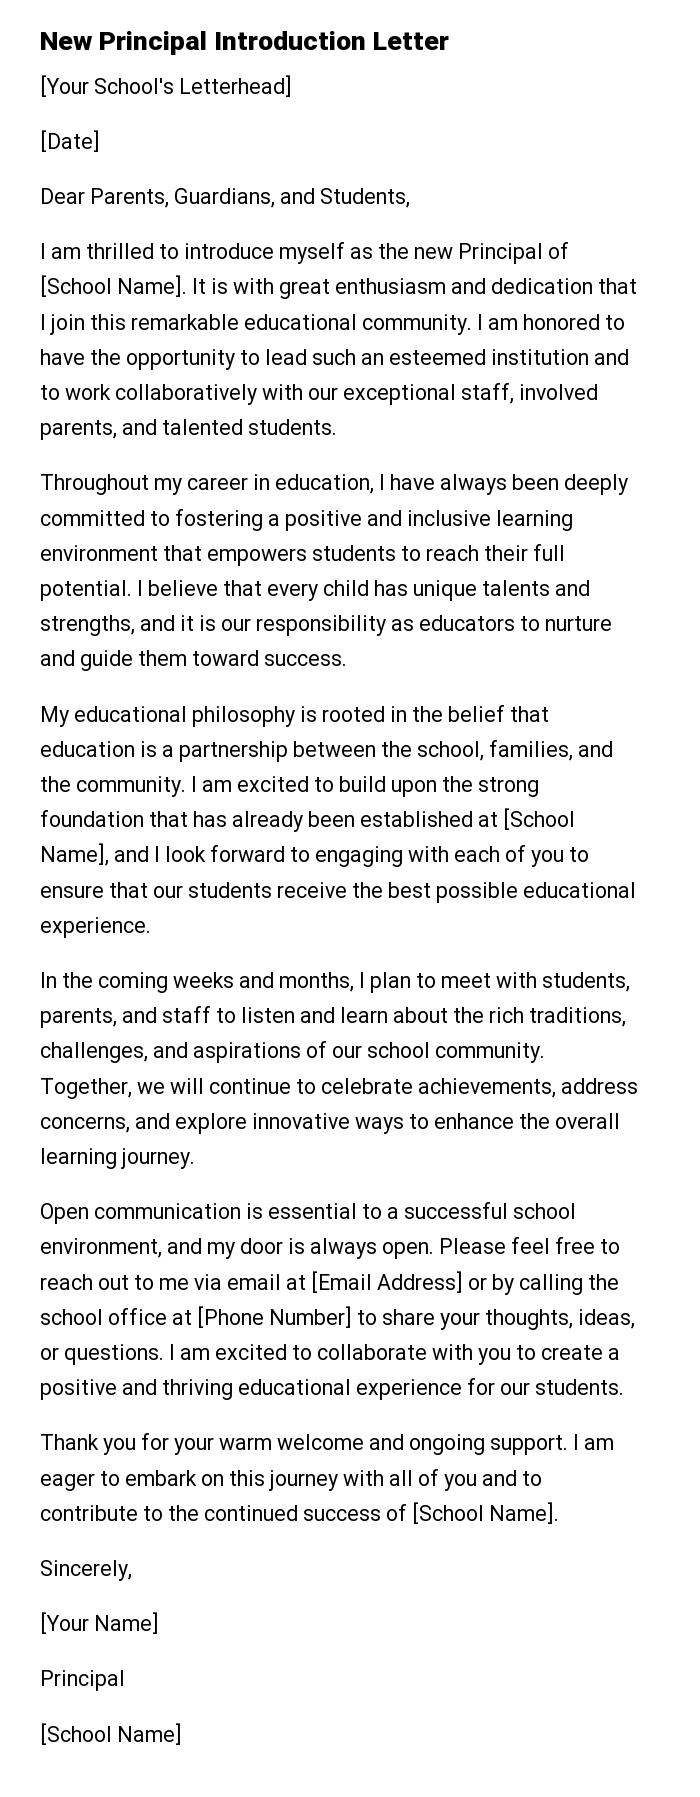 New Principal Introduction Letter